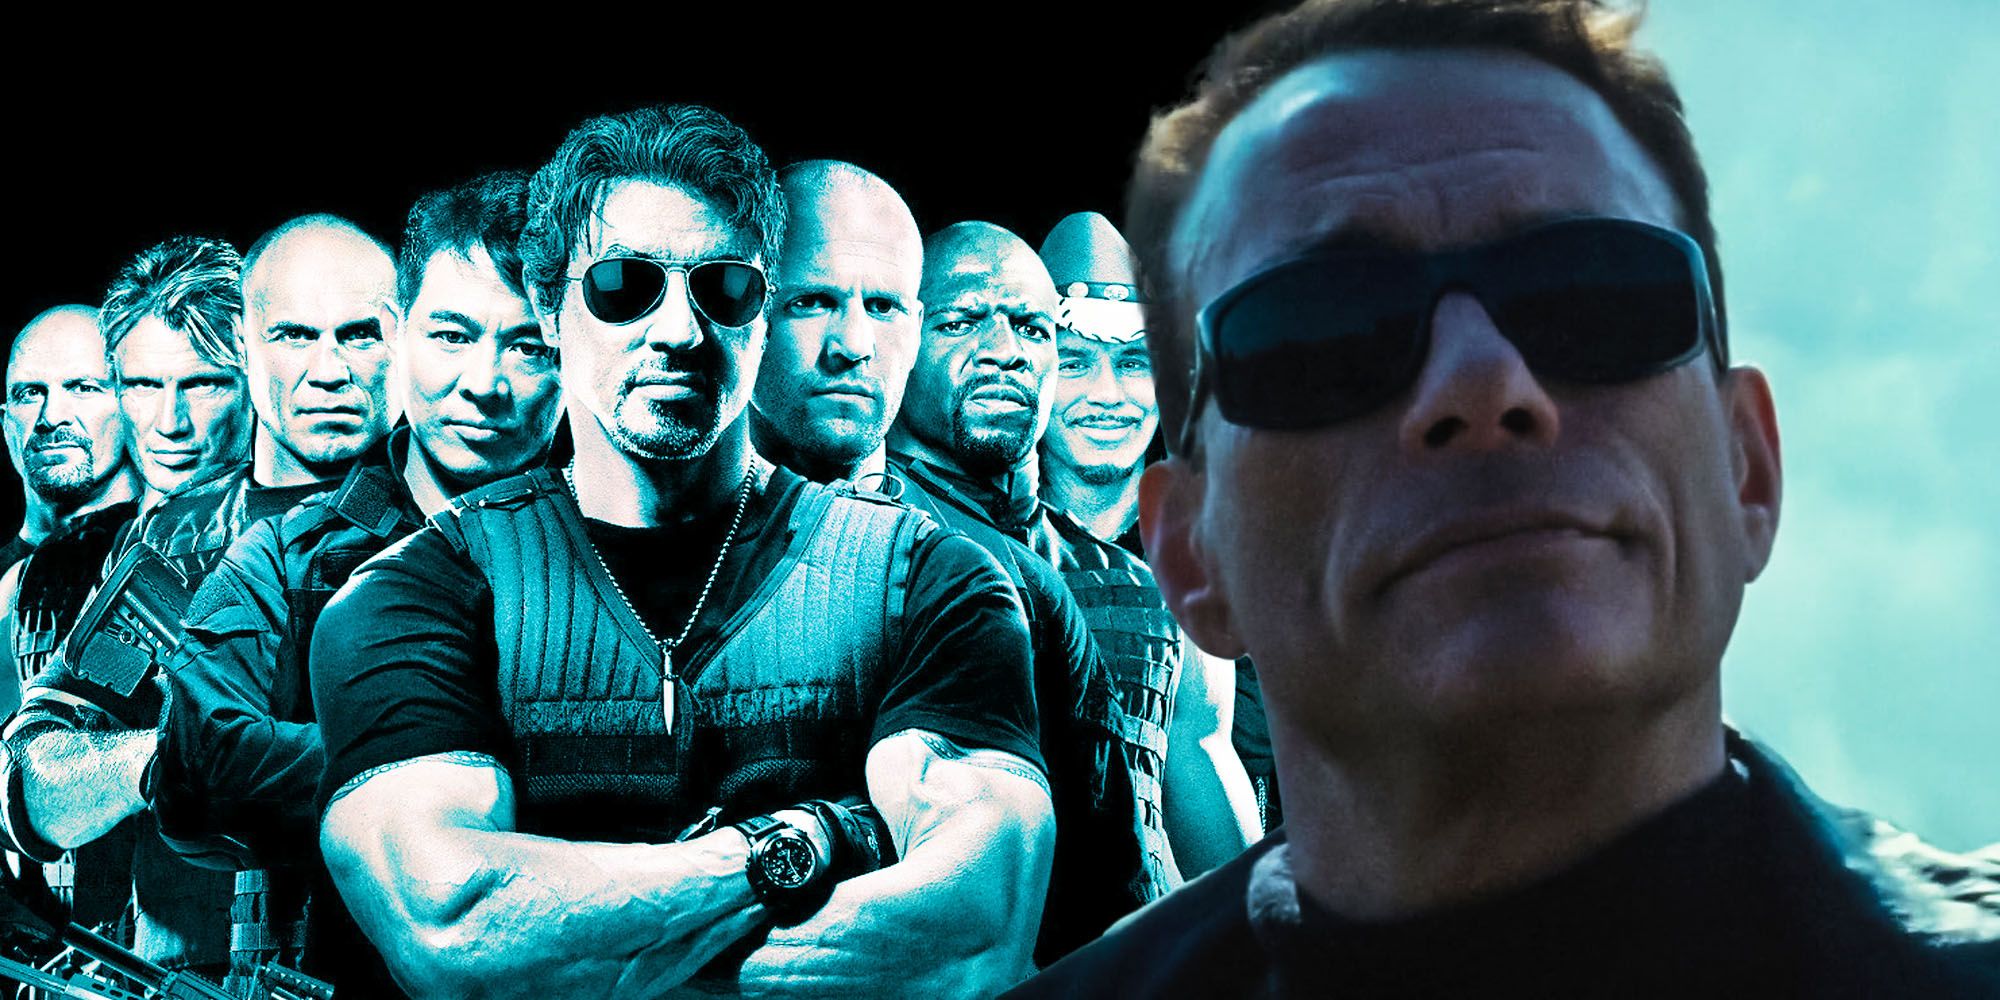 Jean Claude Van Damme turned down Expendables accepted the sequel sylvester stallone jet li jason statham